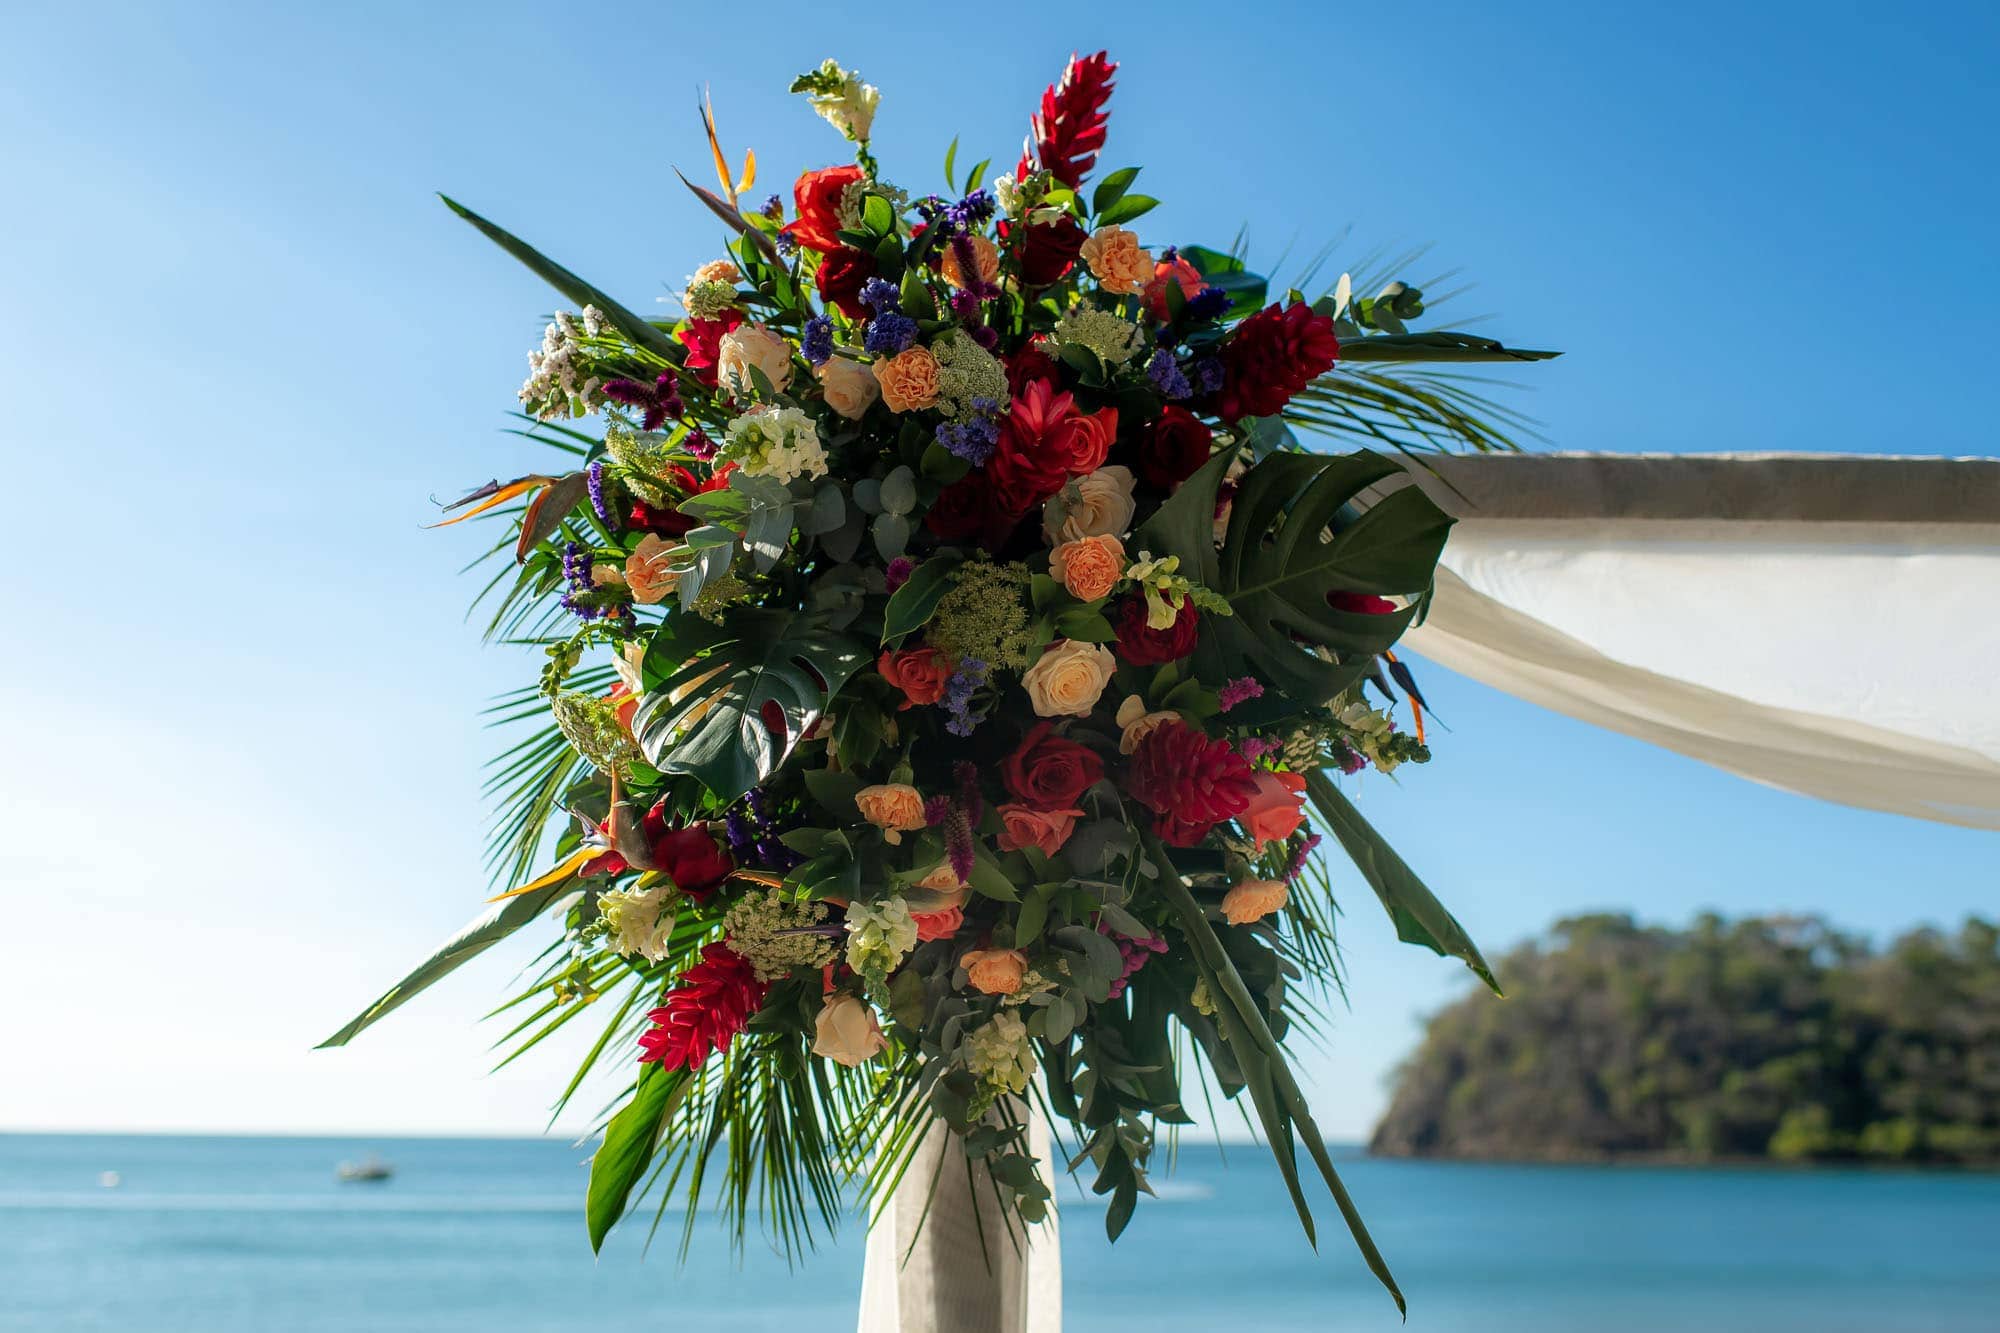 Gorgeous flowers on the arbor done by dreams las mareas weddings